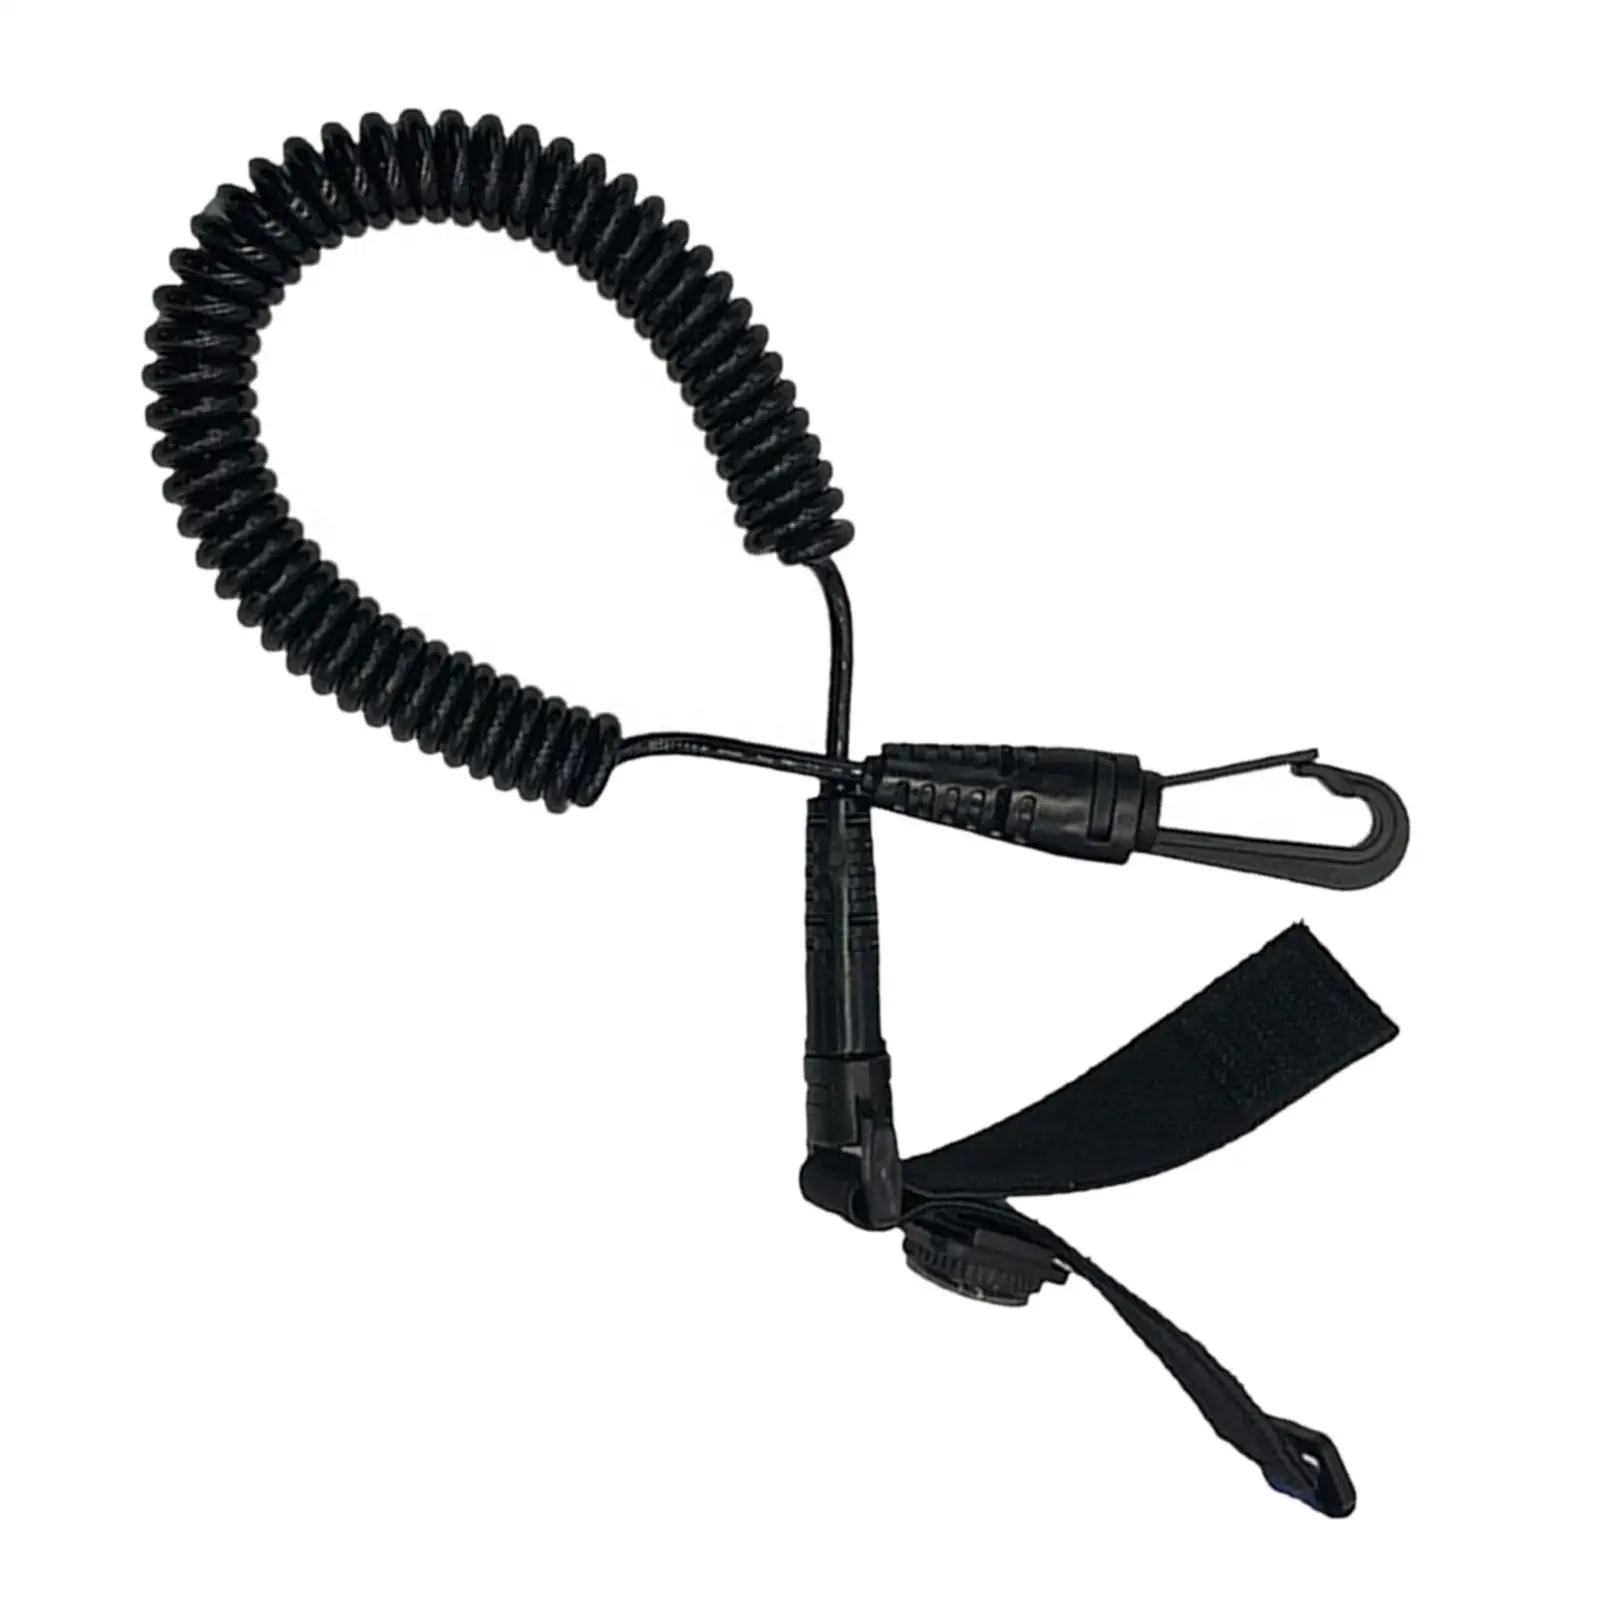 Leash, Kayak Leash, Kayak Accessories, Stretchable Coiled Rod for